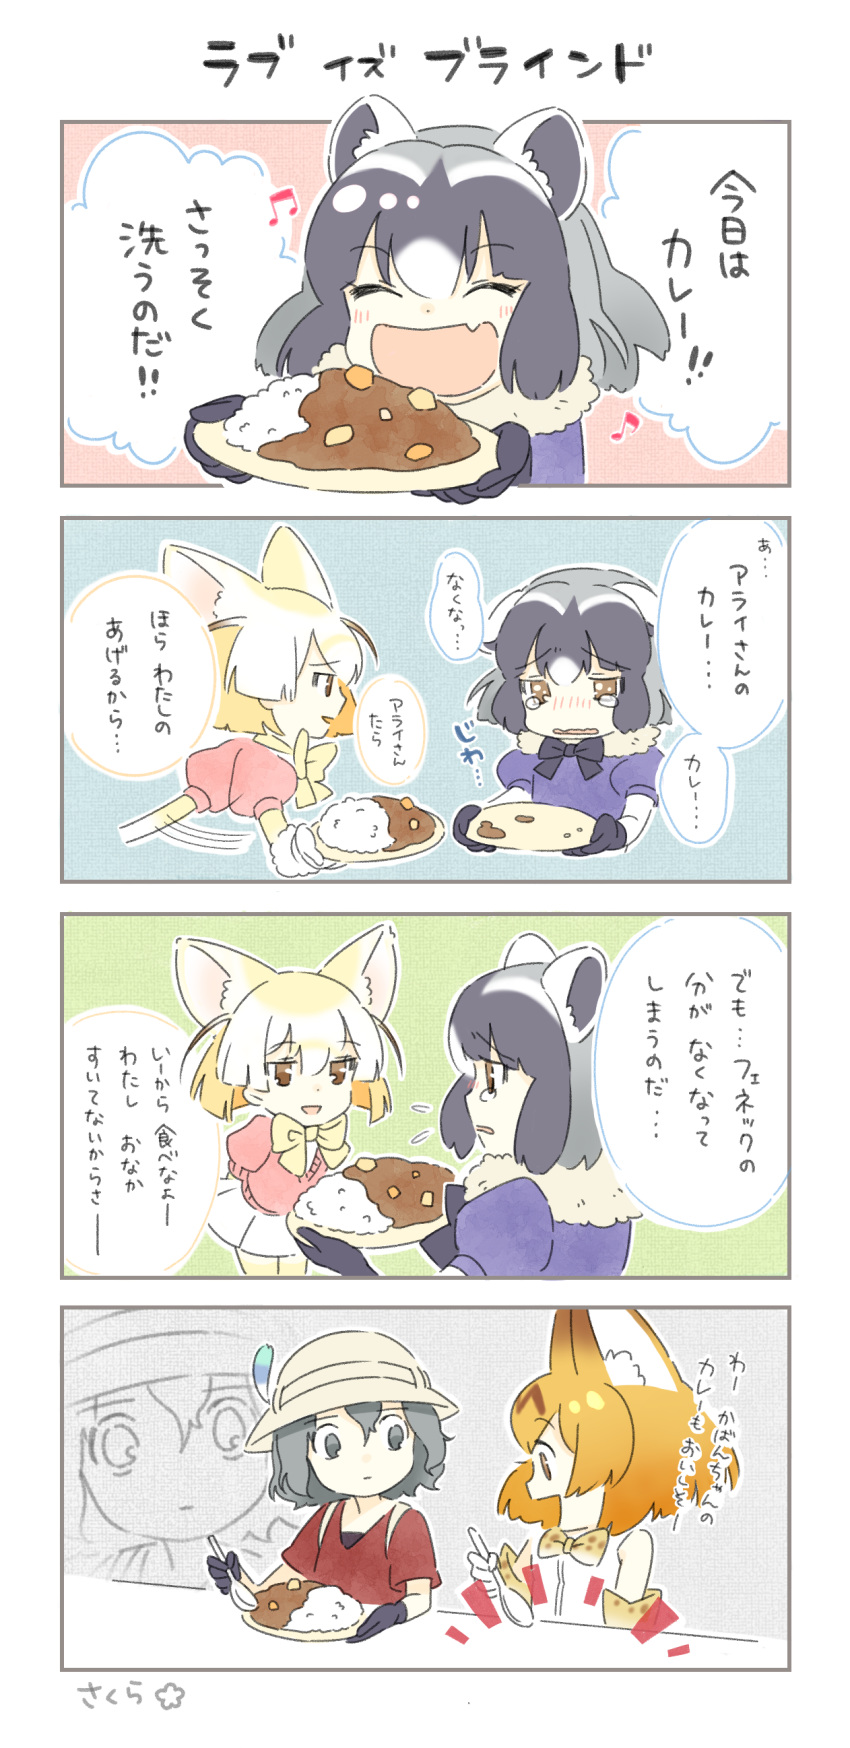 4girls 4koma ^_^ absurdres animal_ears aru9a3_(sakura) bag blush closed_eyes comic common_raccoon_(kemono_friends) curry empty_eyes fang fennec_(kemono_friends) food fox_ears hat_feather highres kaban_(kemono_friends) kemono_friends multiple_girls open_mouth plate raccoon_(kemono_friends) raccoon_ears red_shirt rice serval_(kemono_friends) serval_ears shirt sitting smile speech_bubble spoon table tears text translation_request